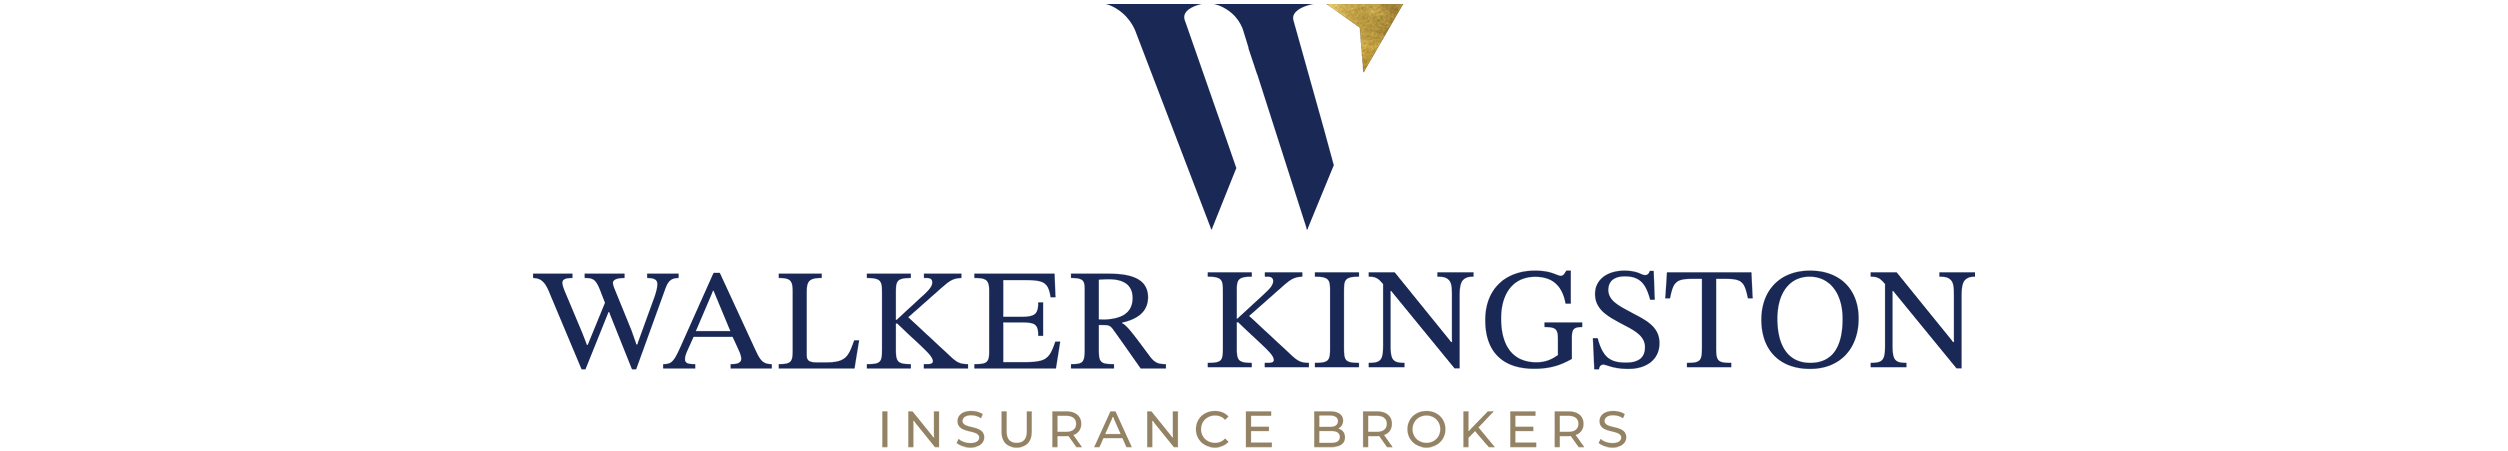 Newcastle Business Insurance Brokers - Walker & Young